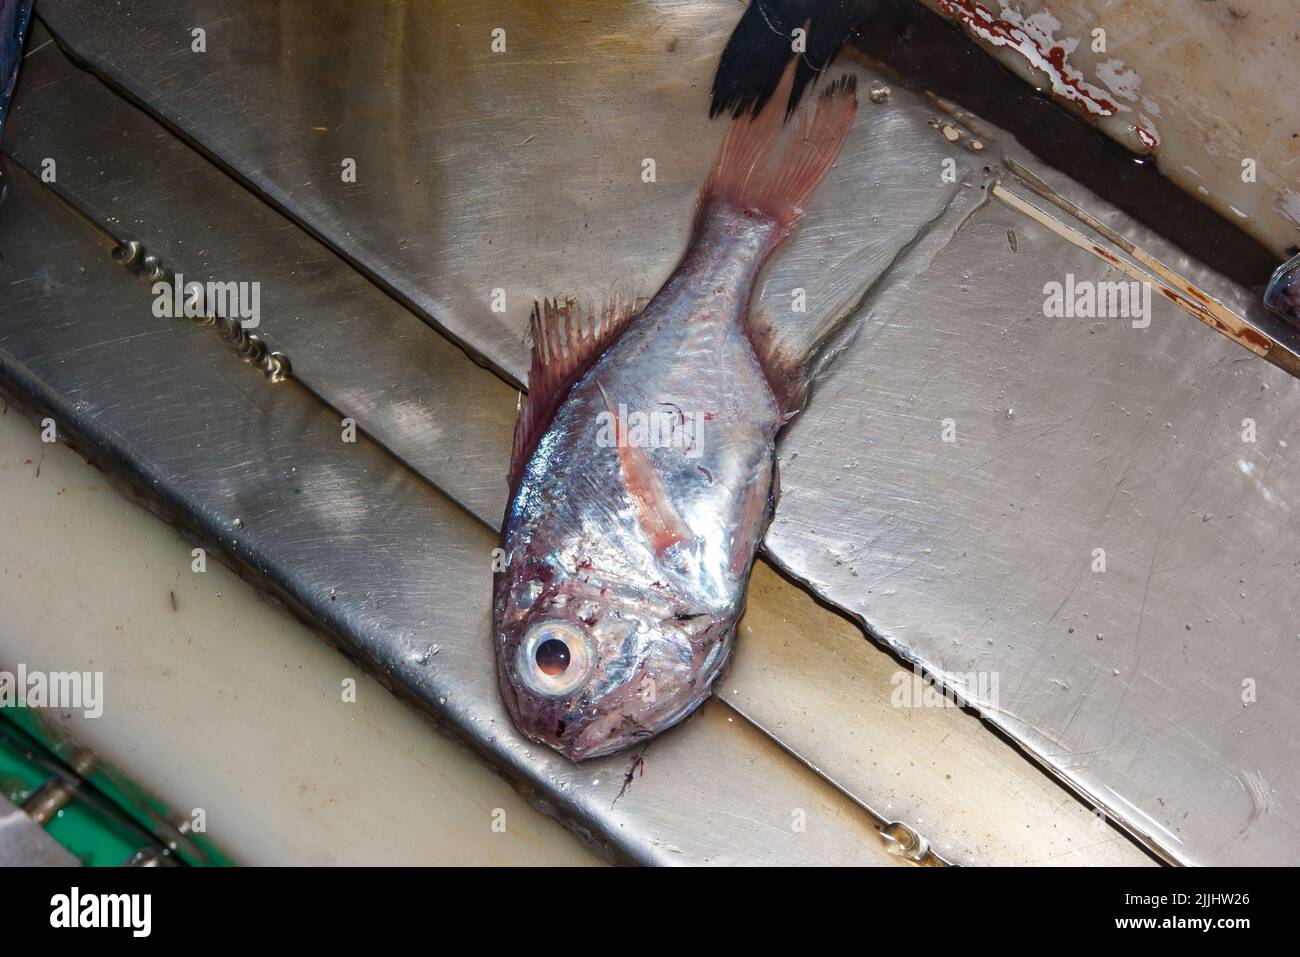 A Look at life in New Zealand: Freshly landed catch, from a deep-sea fishing trawler: Common Roughy (Paratrachichthys trailli). Stock Photo